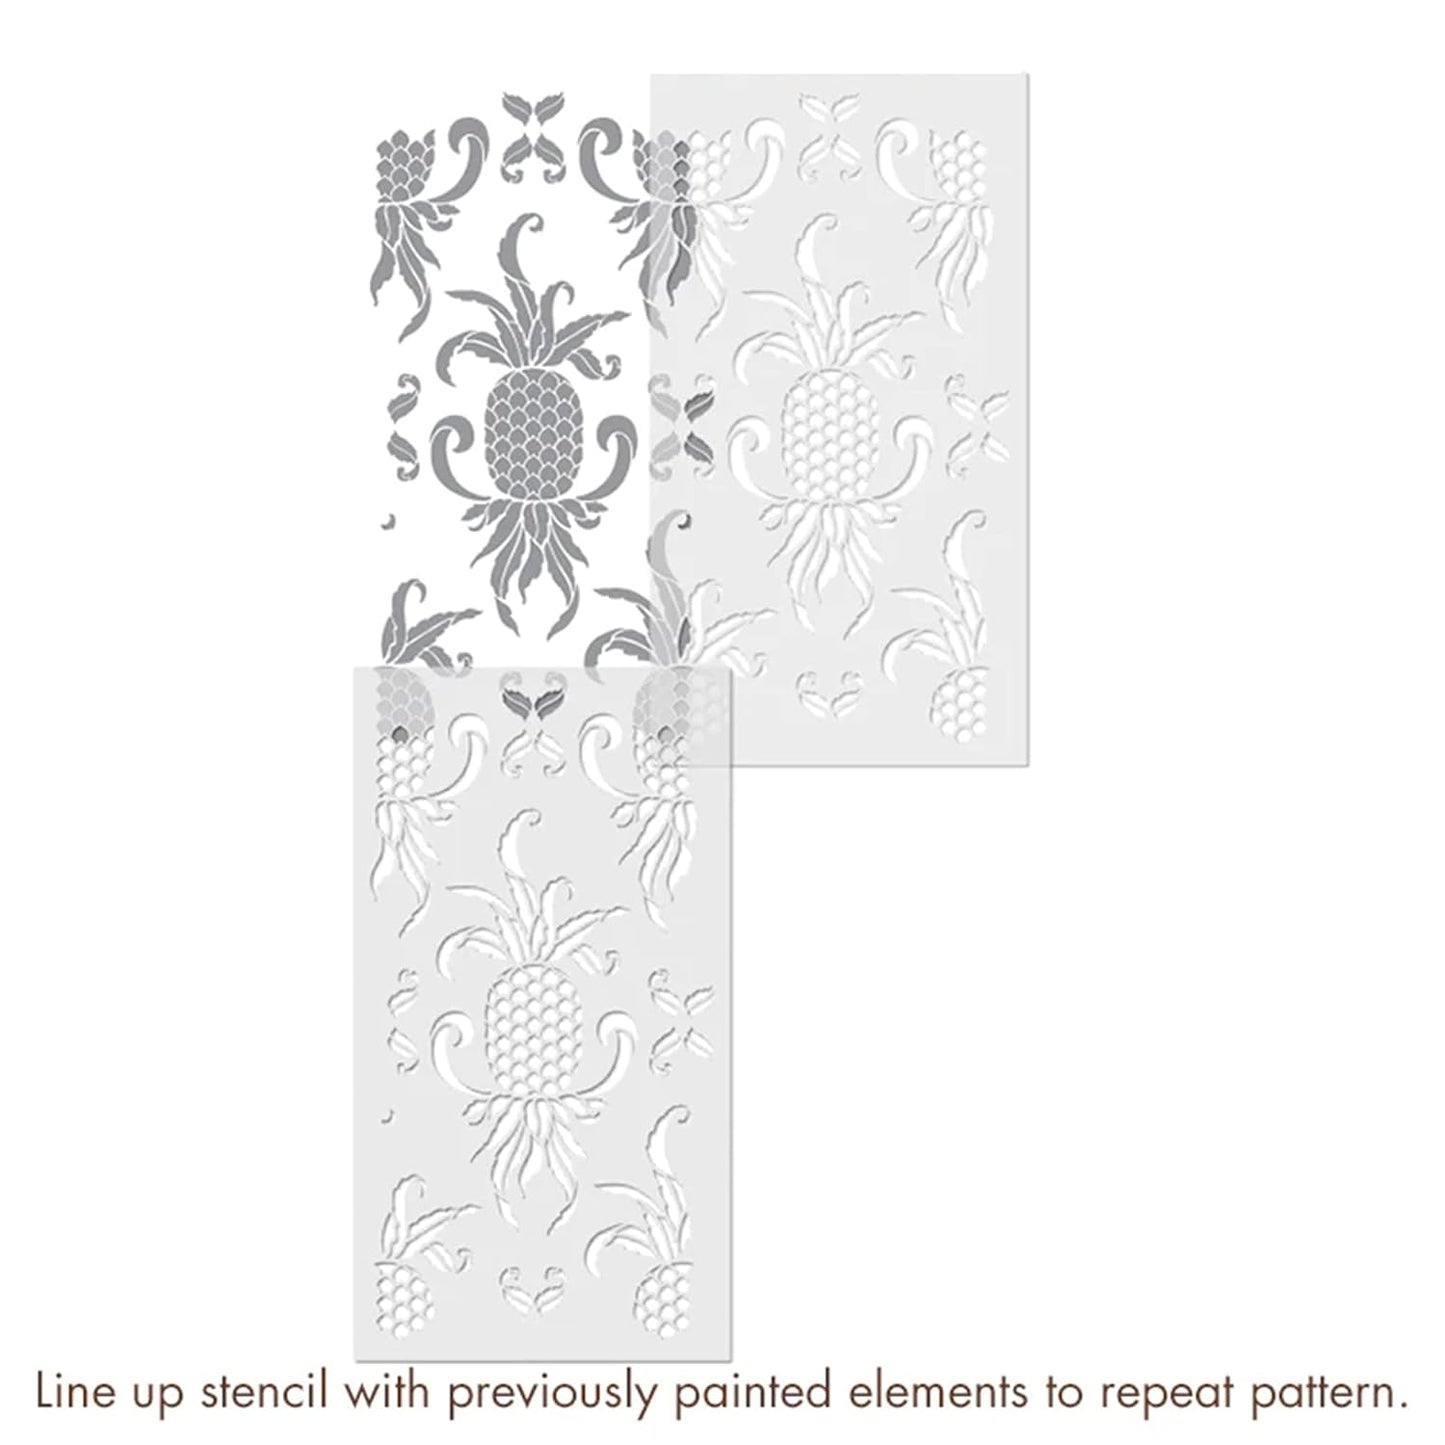 Latest Pineapple Design Stencils for Wall Painting - Pack of 1, Sheet Size 20 x 36 inch/Design for Wall Painting 18 x 34 inch - Medium